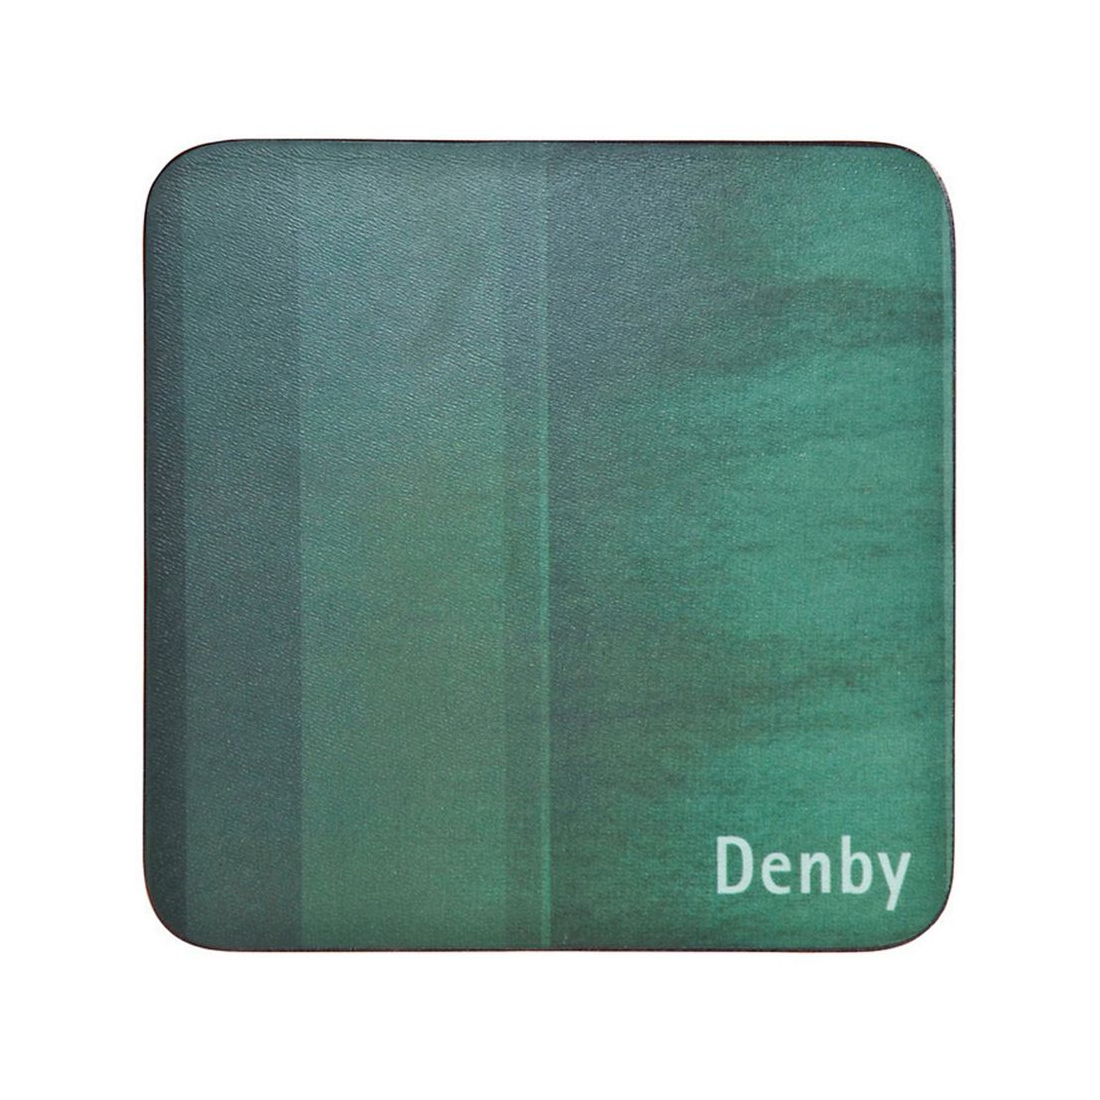 Denby Colours Set of 6 Coasters - Green